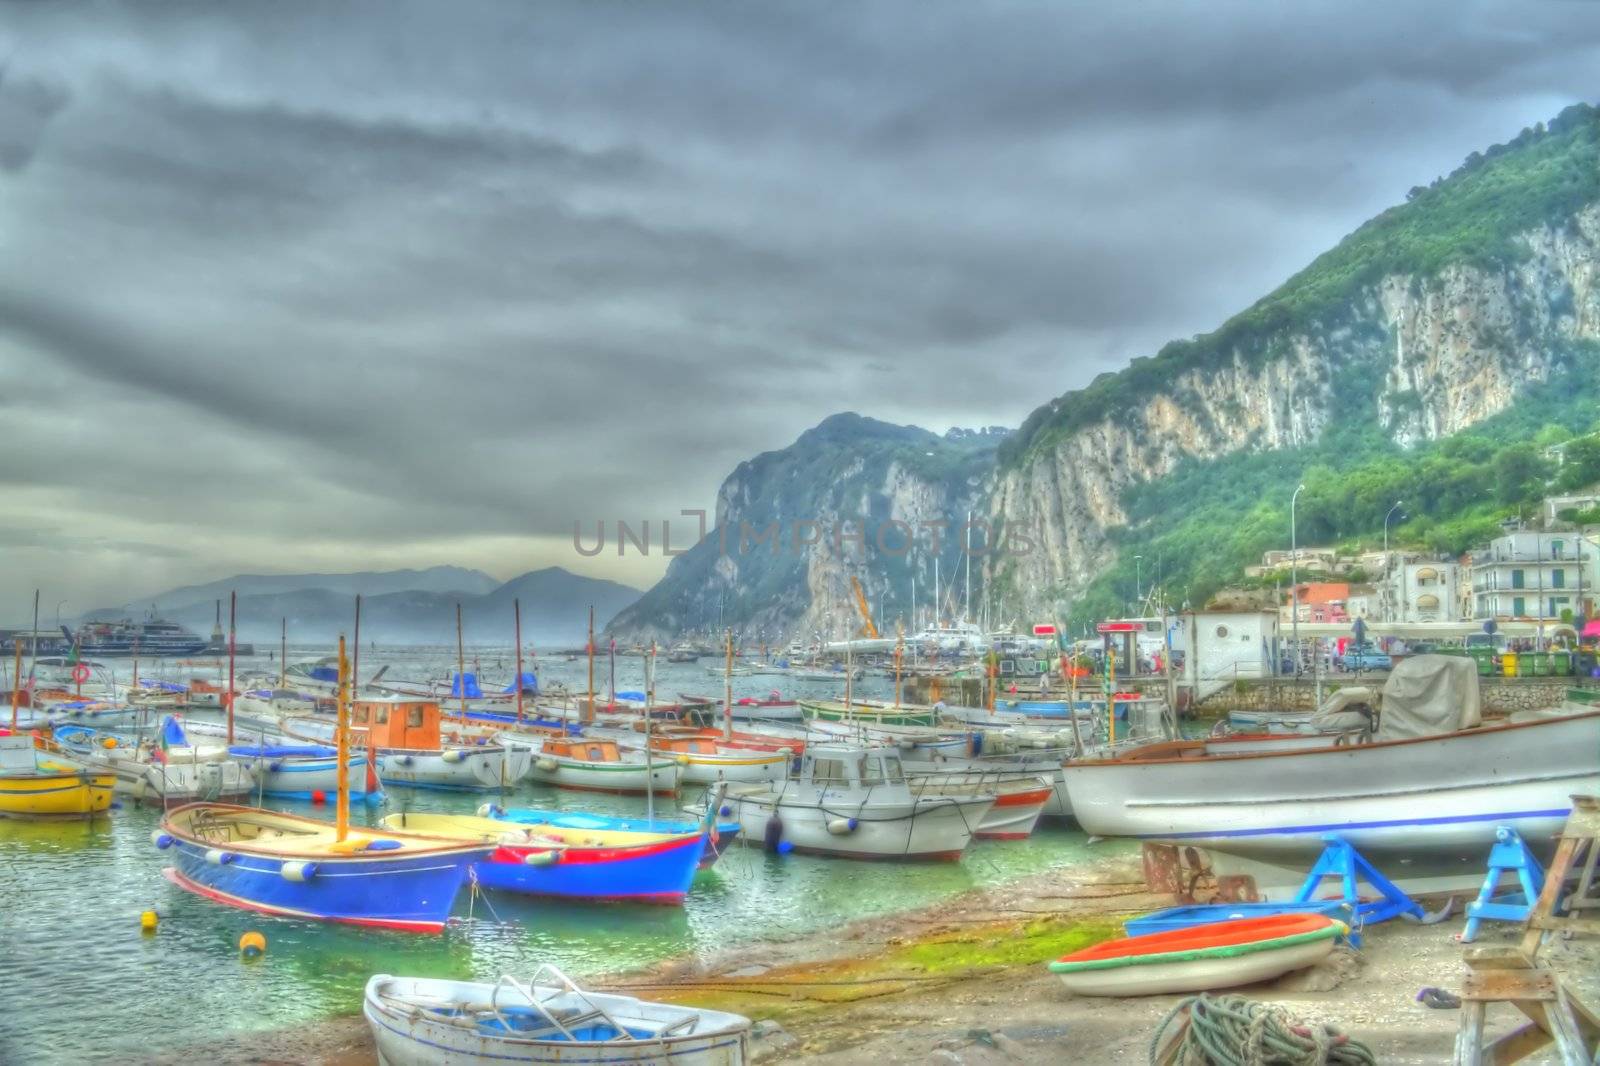 Boats of Capri processed to appear is if they were painted.